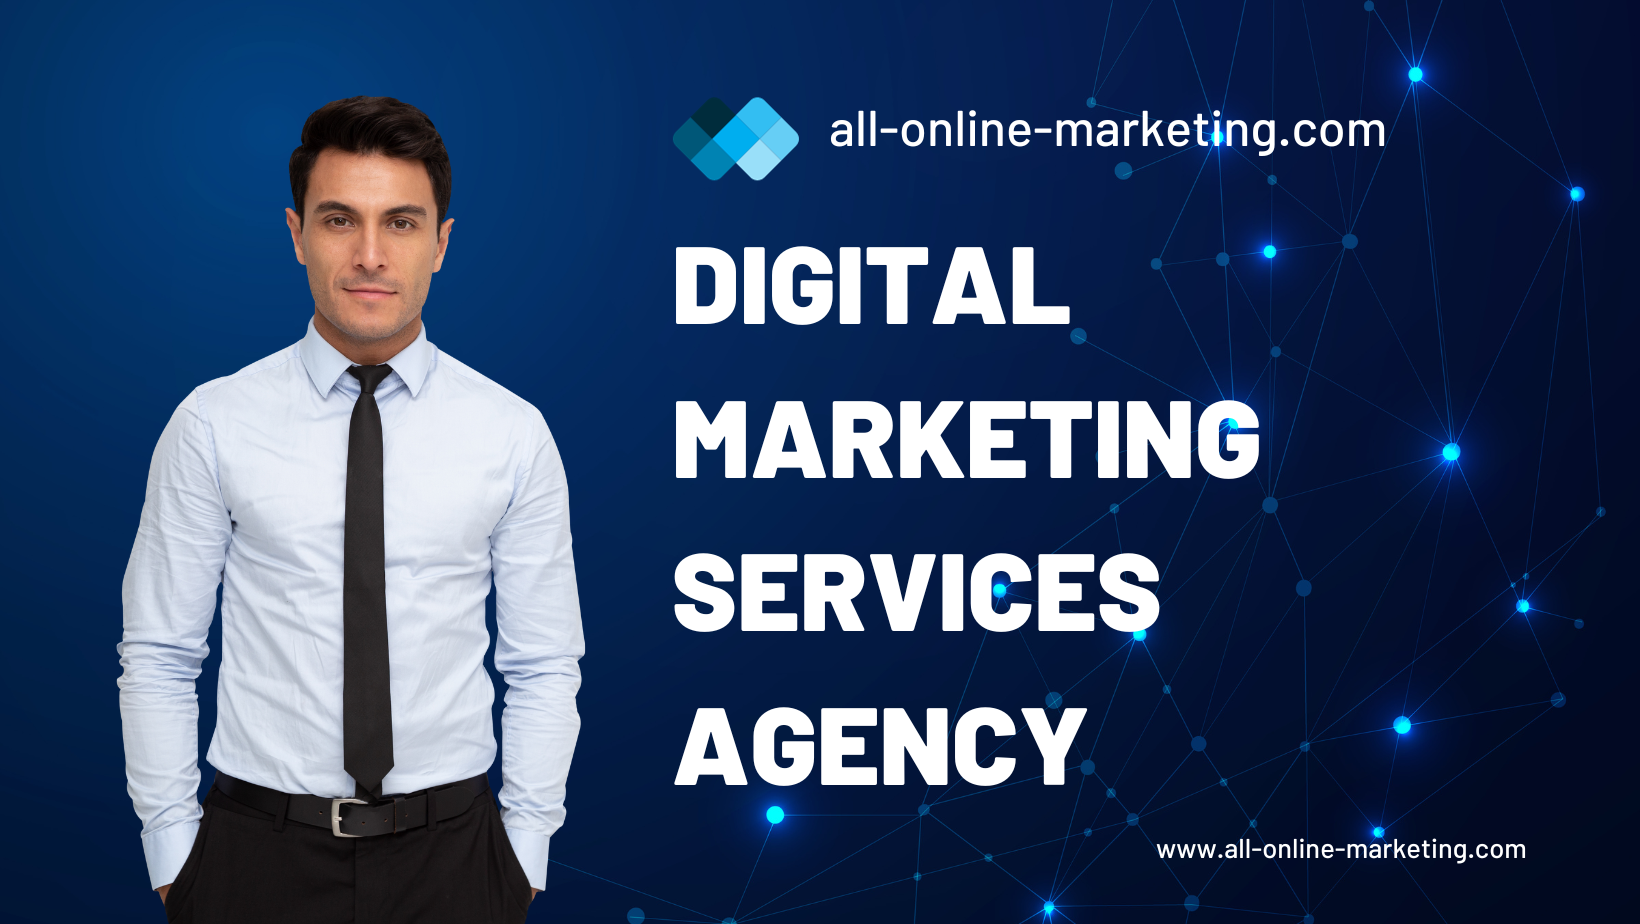 All-Online-Marketing.com : Affordable Digital Marketing Services for Small Businesses in Dubai UAE at Cheapest Price & Low Cost